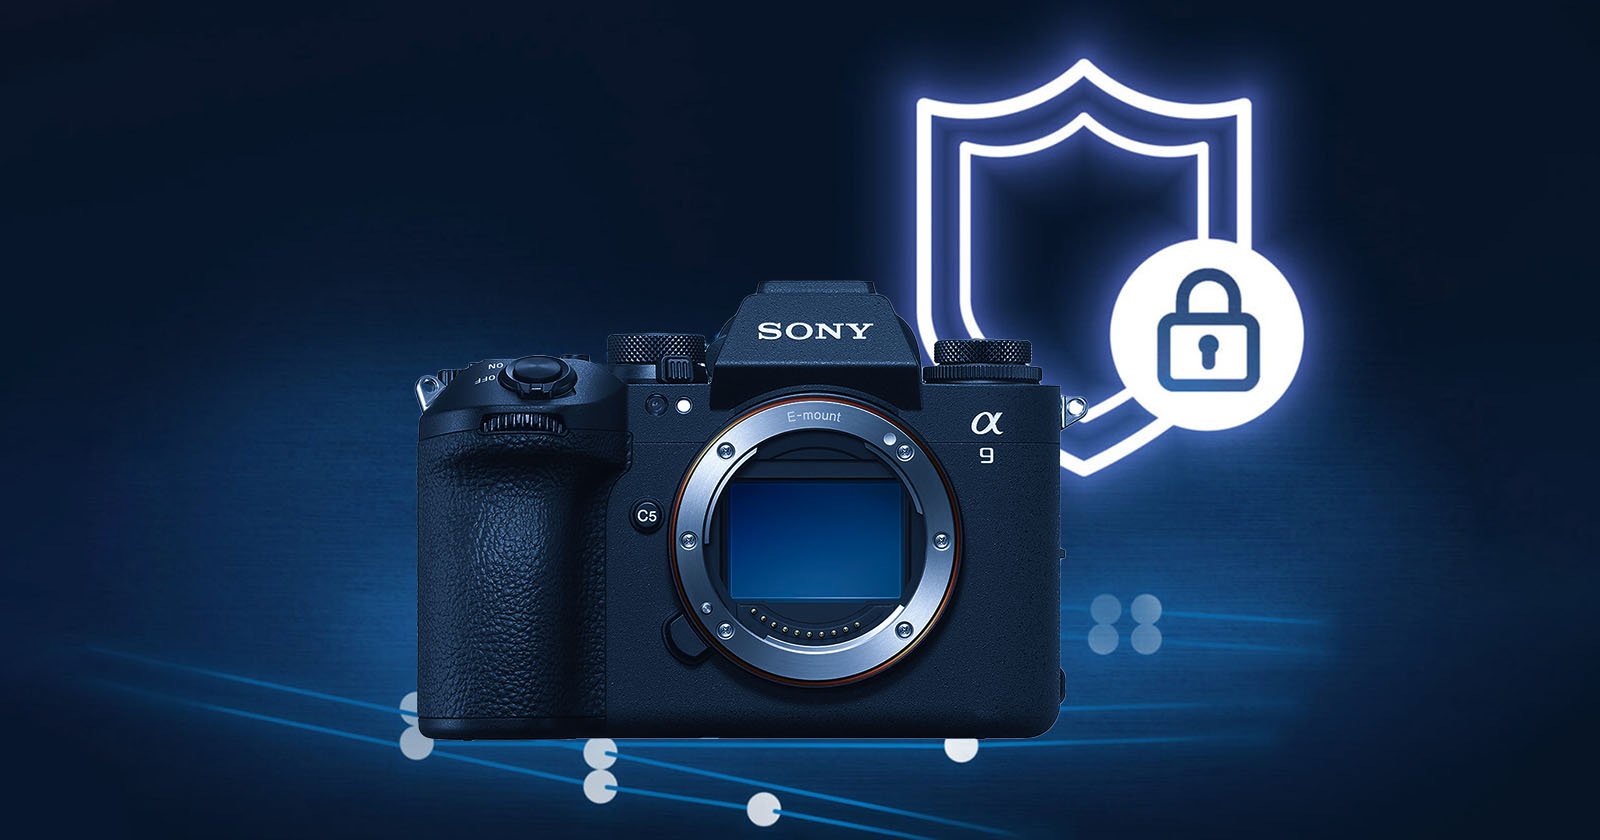 Sonys In-Camera Authentication Technology Passes APs Tests